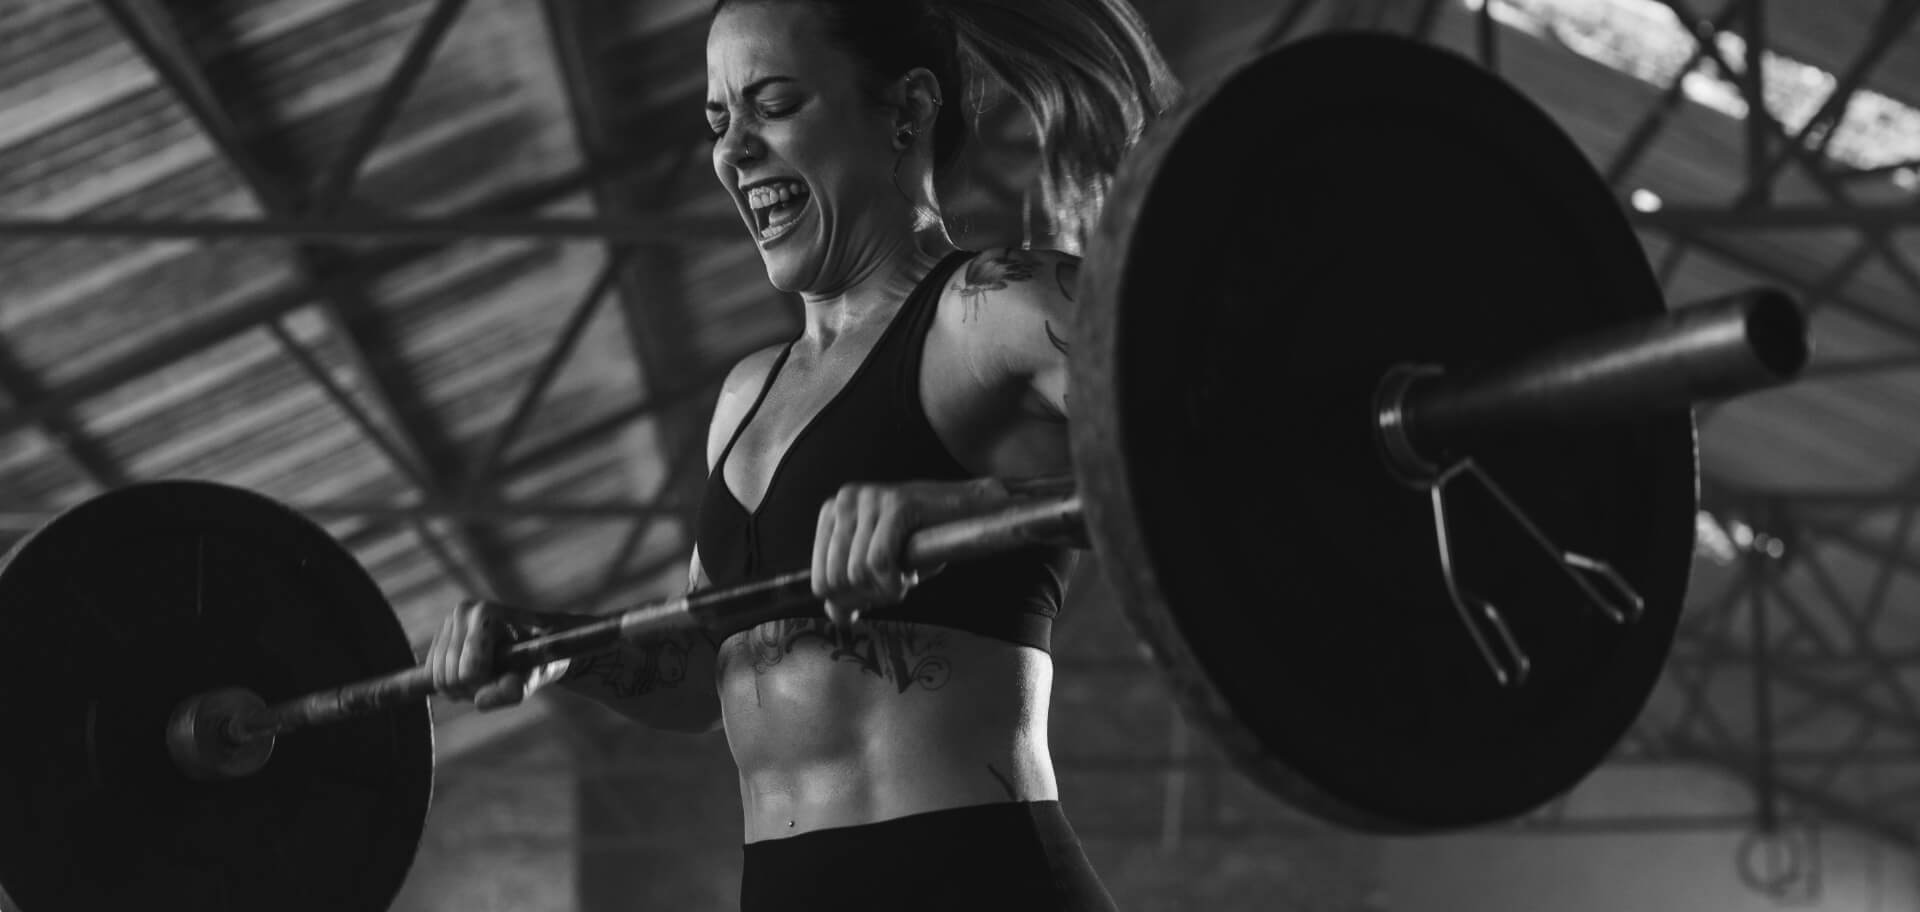 Lady lifting a barbell